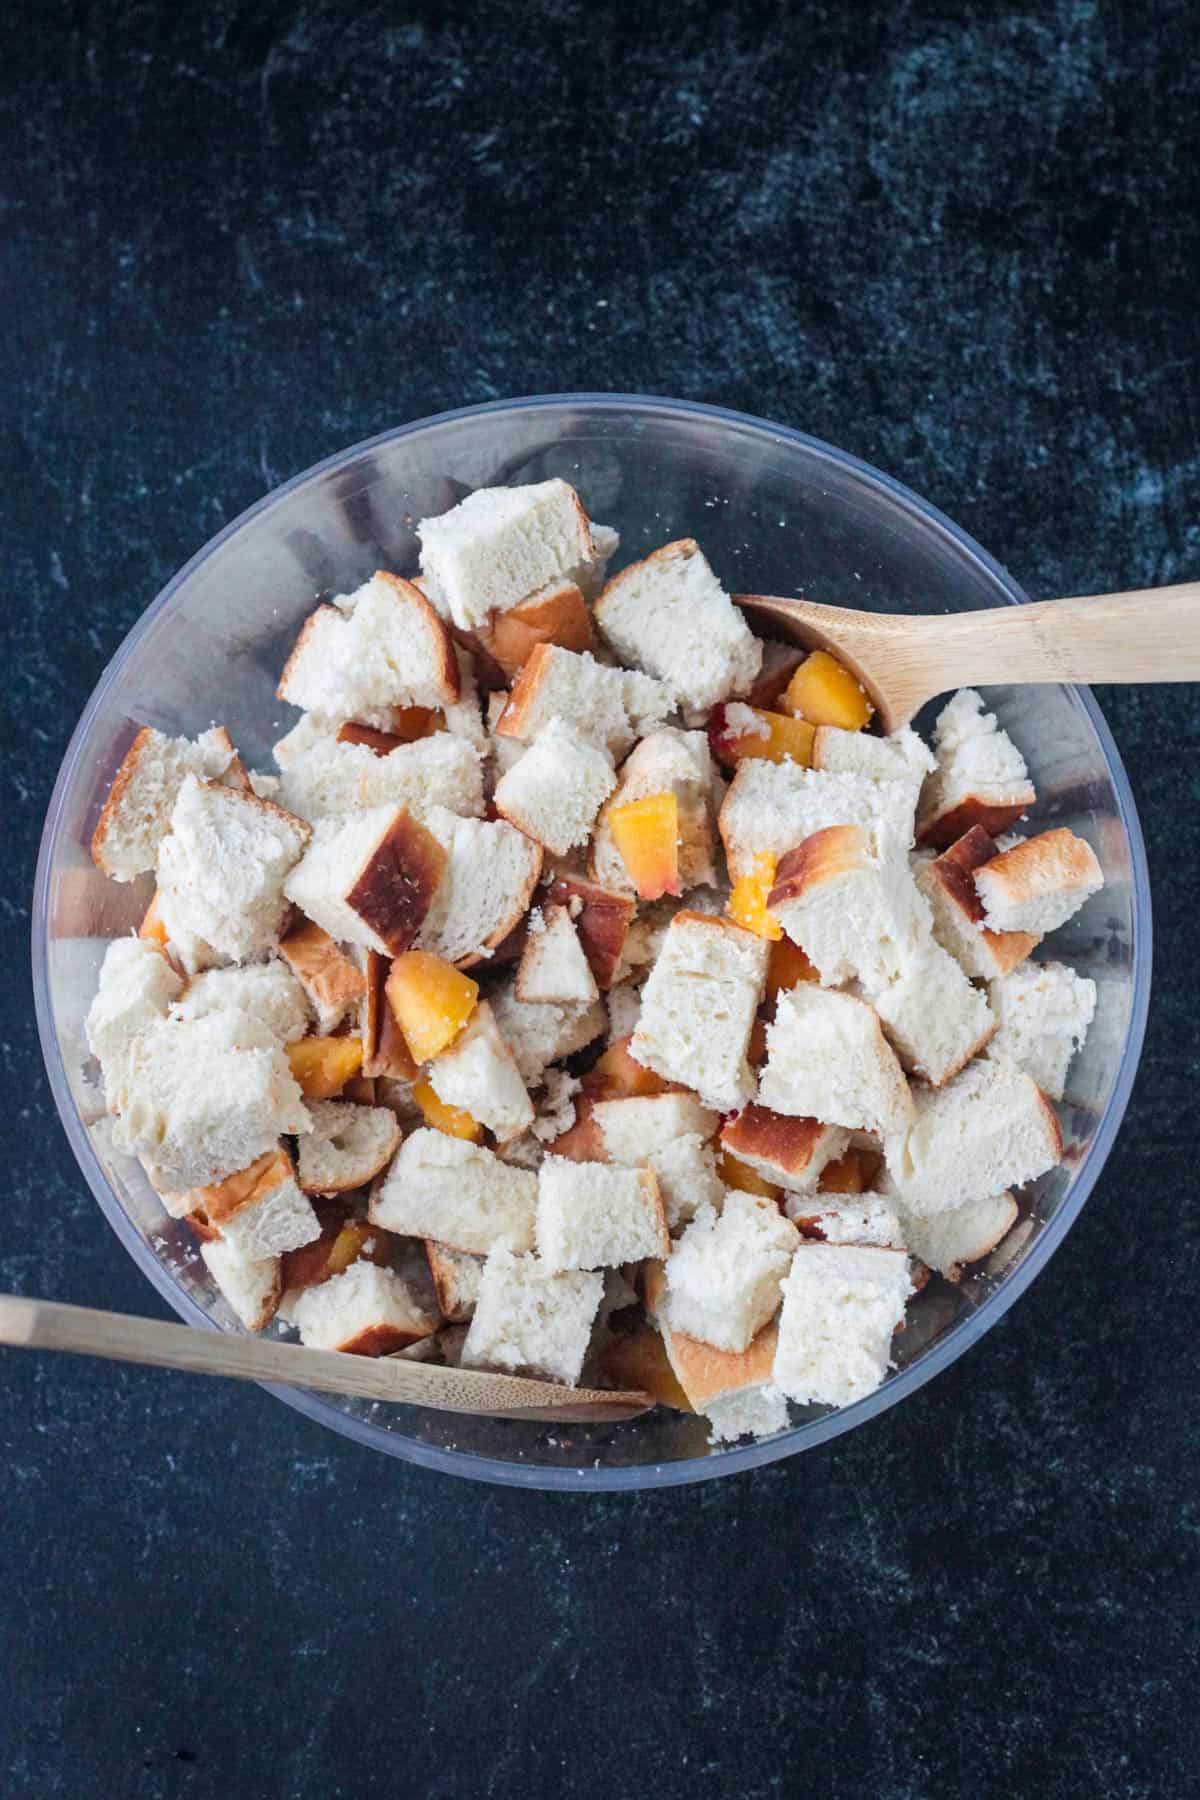 Cubed bread and diced peaches mixed in a large bowl.